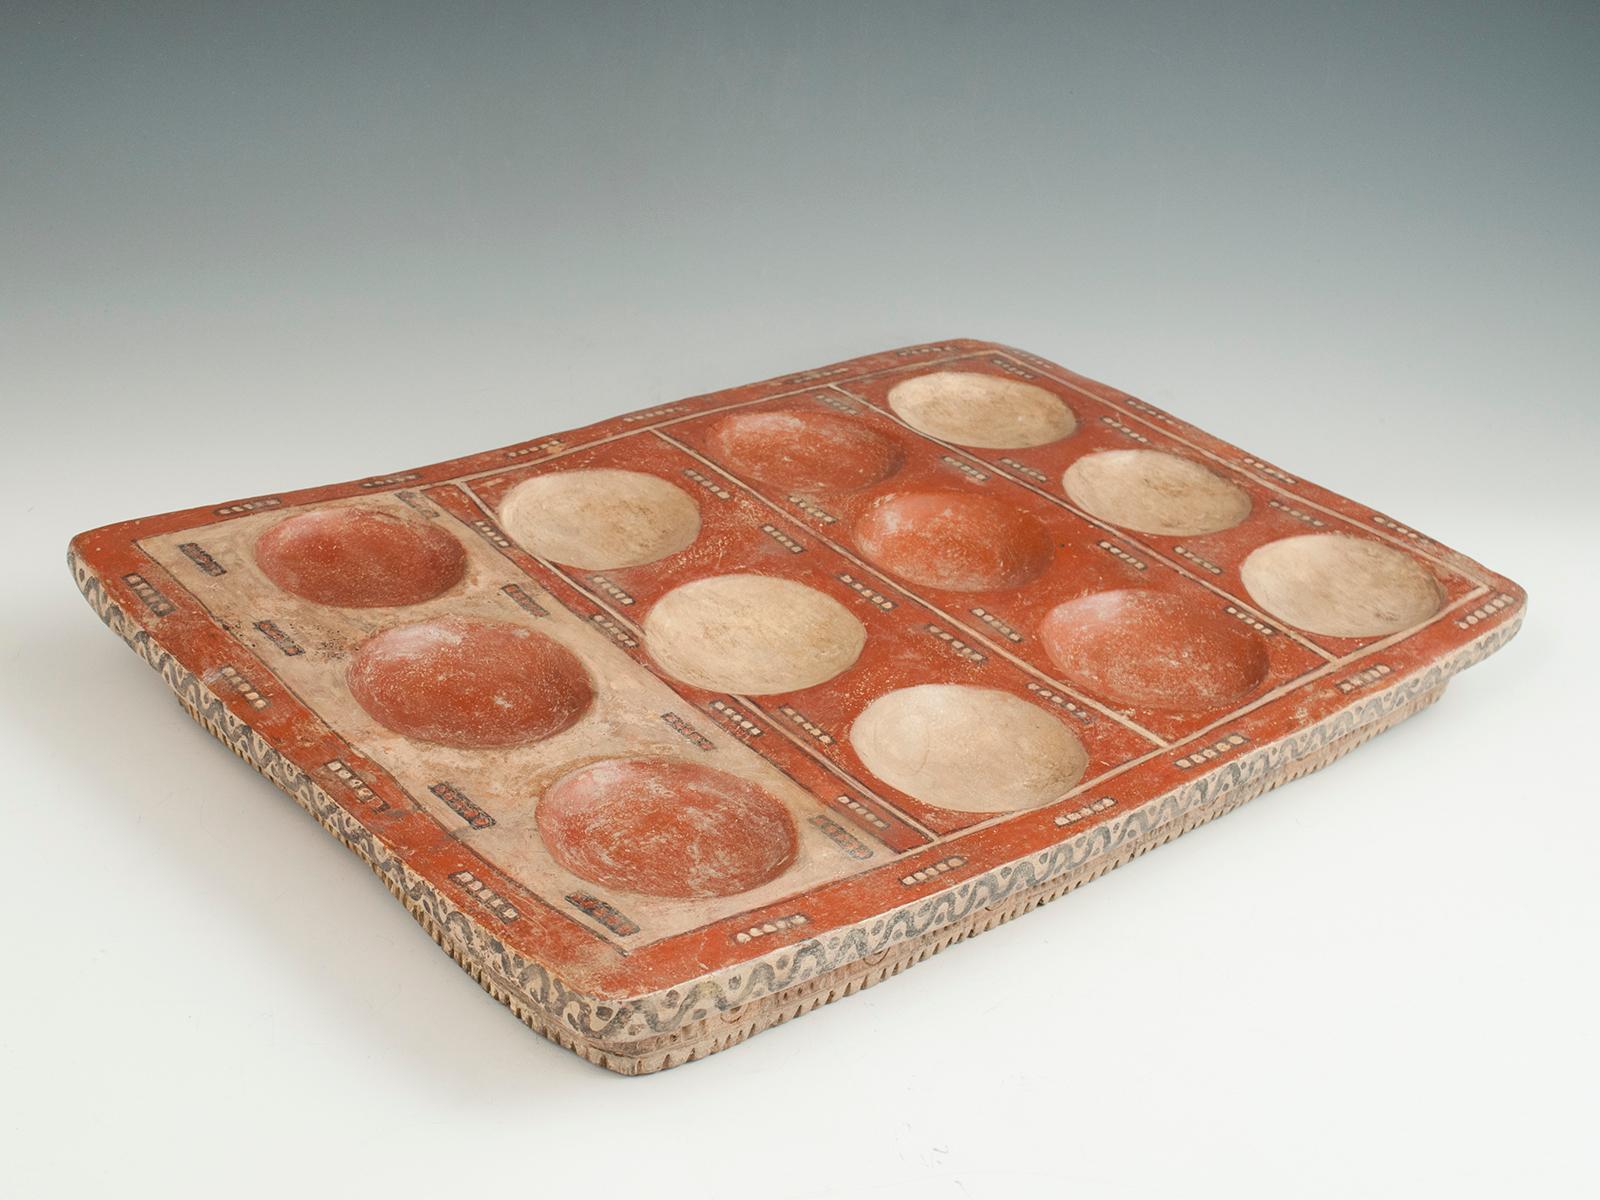 Pre-Columbian Terracotta game board or tablet, Chachapoyas, Northern Peru

This is a rare game board or tablet from the pre-Incan Chachapoyas culture of Northern Peru. Its use is mysterious, and its graphic appeal is immediate.
Measures: 13